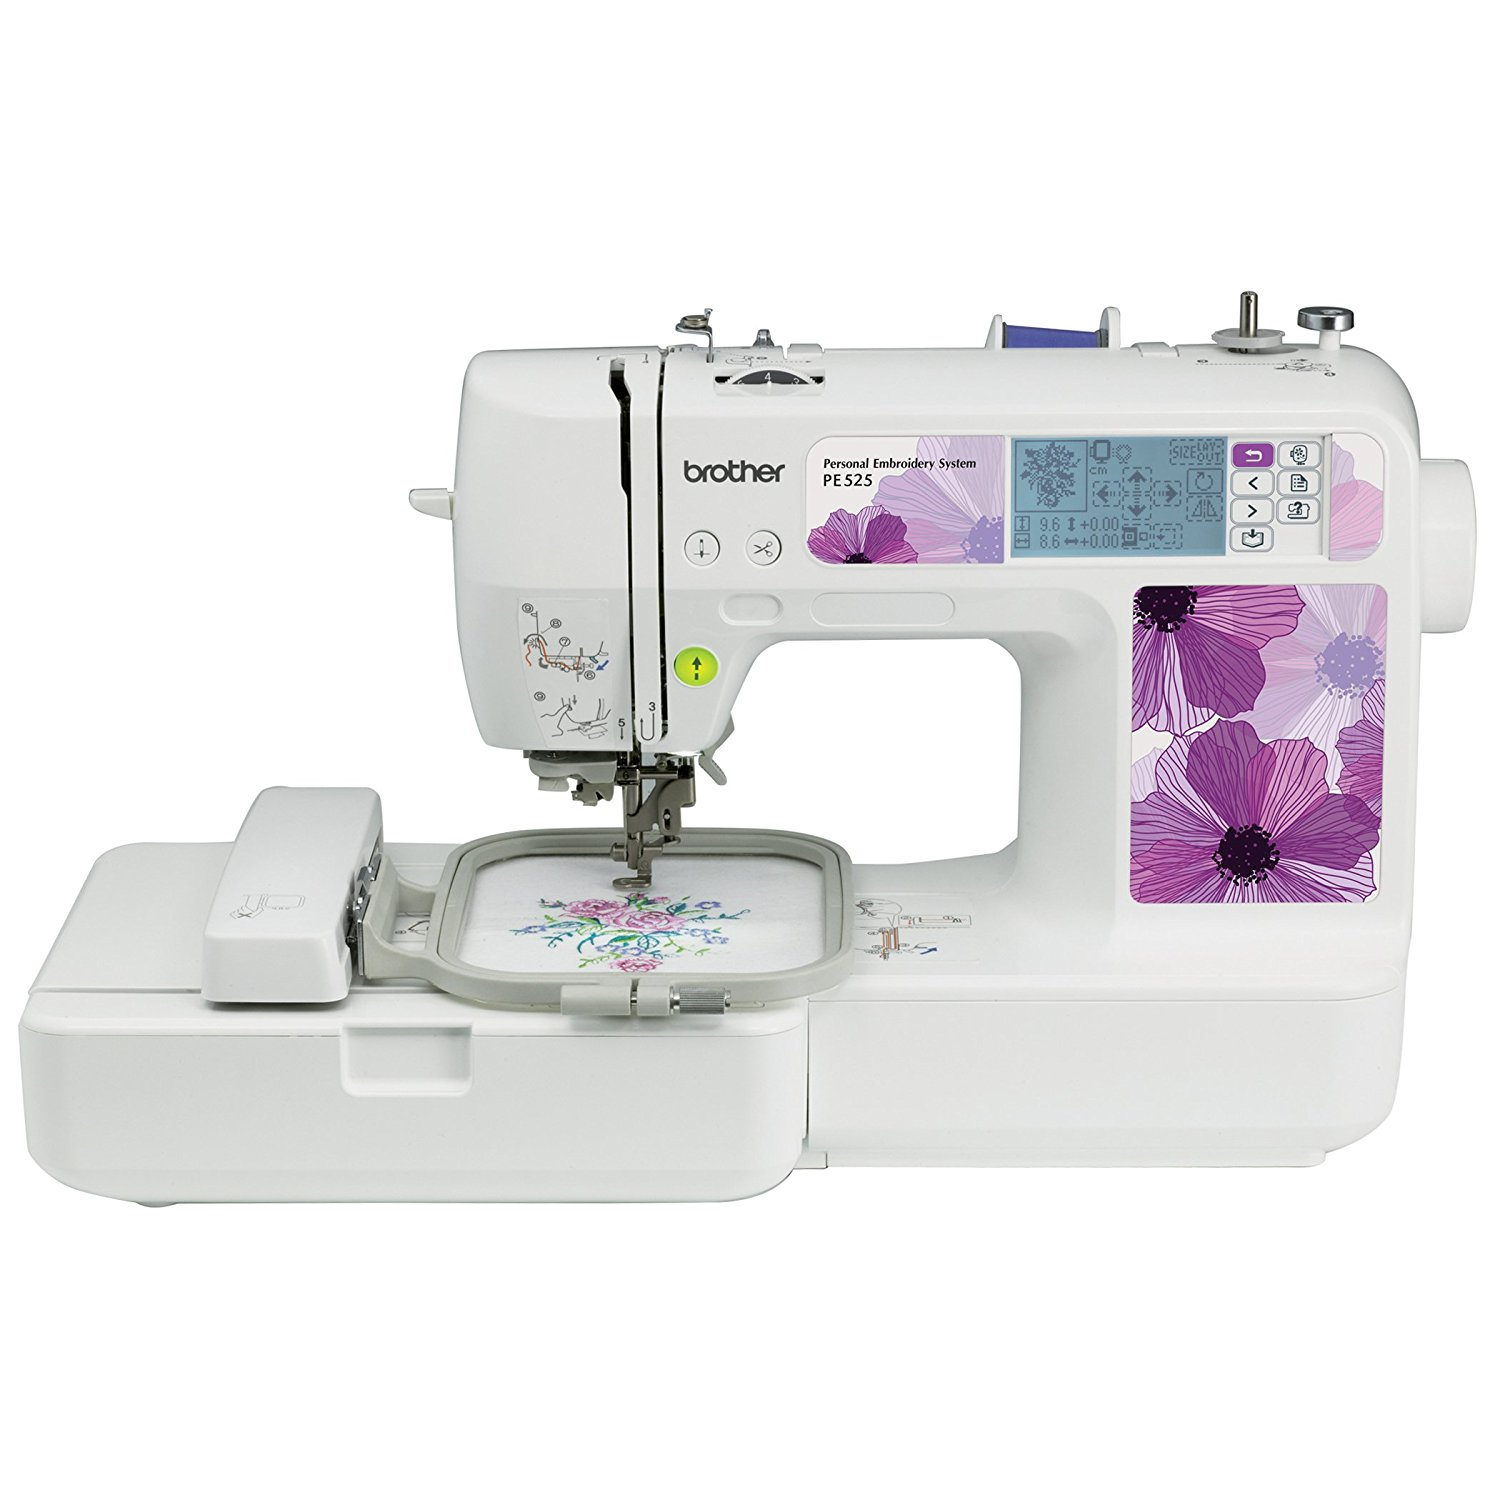 Brother Sewing Machine Embroidery Patterns 6 Best Monogramming Sewing Machines In The Market 2019 Sew Care